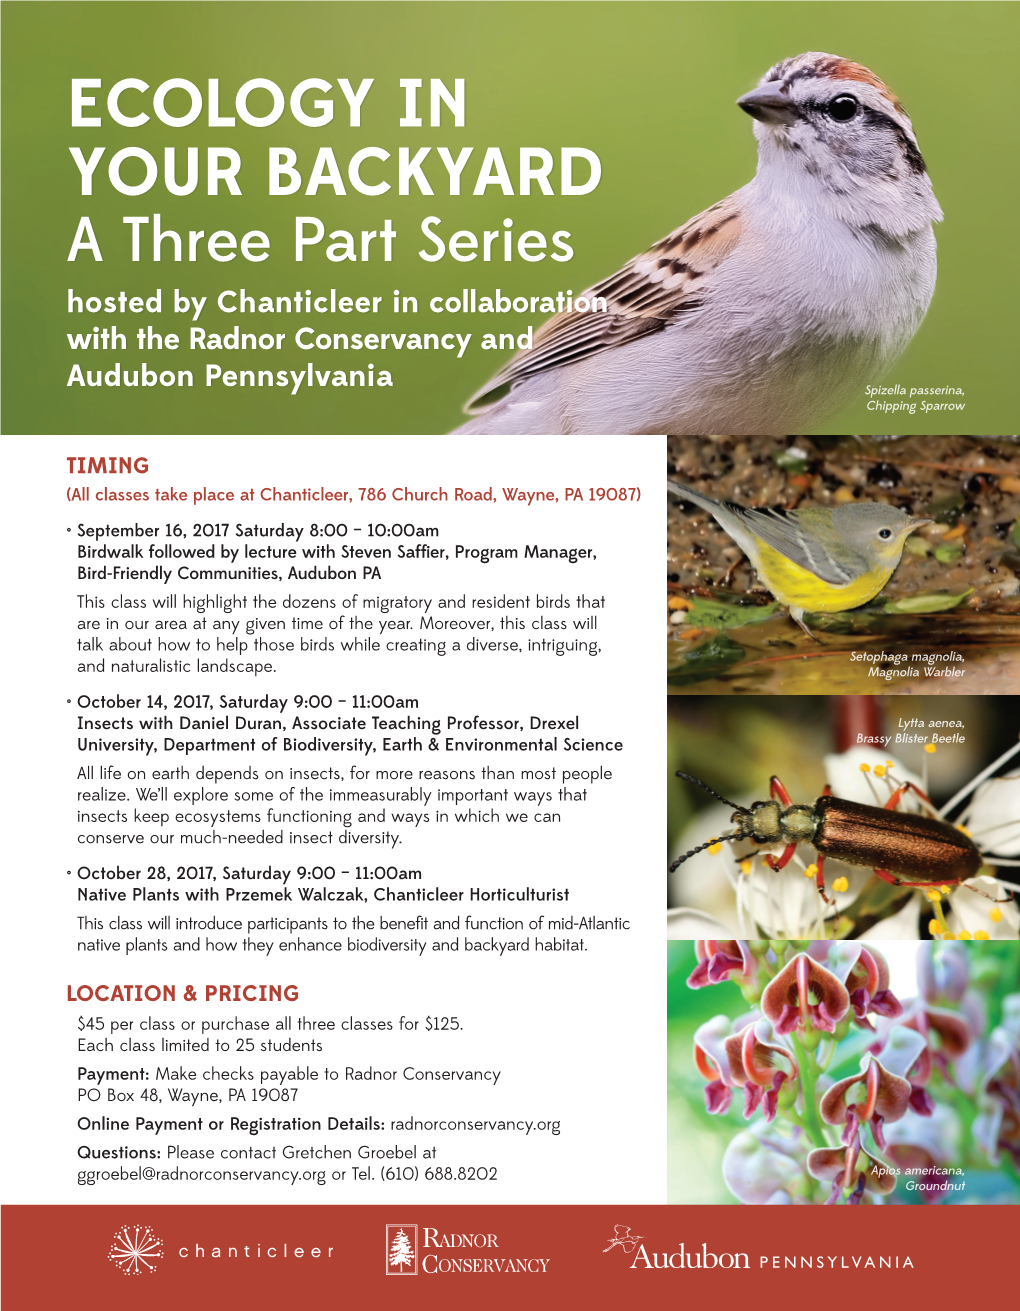 ECOLOGY in YOUR BACKYARD a Three Part Series Hosted by Chanticleer in Collaboration with the Radnor Conservancy And